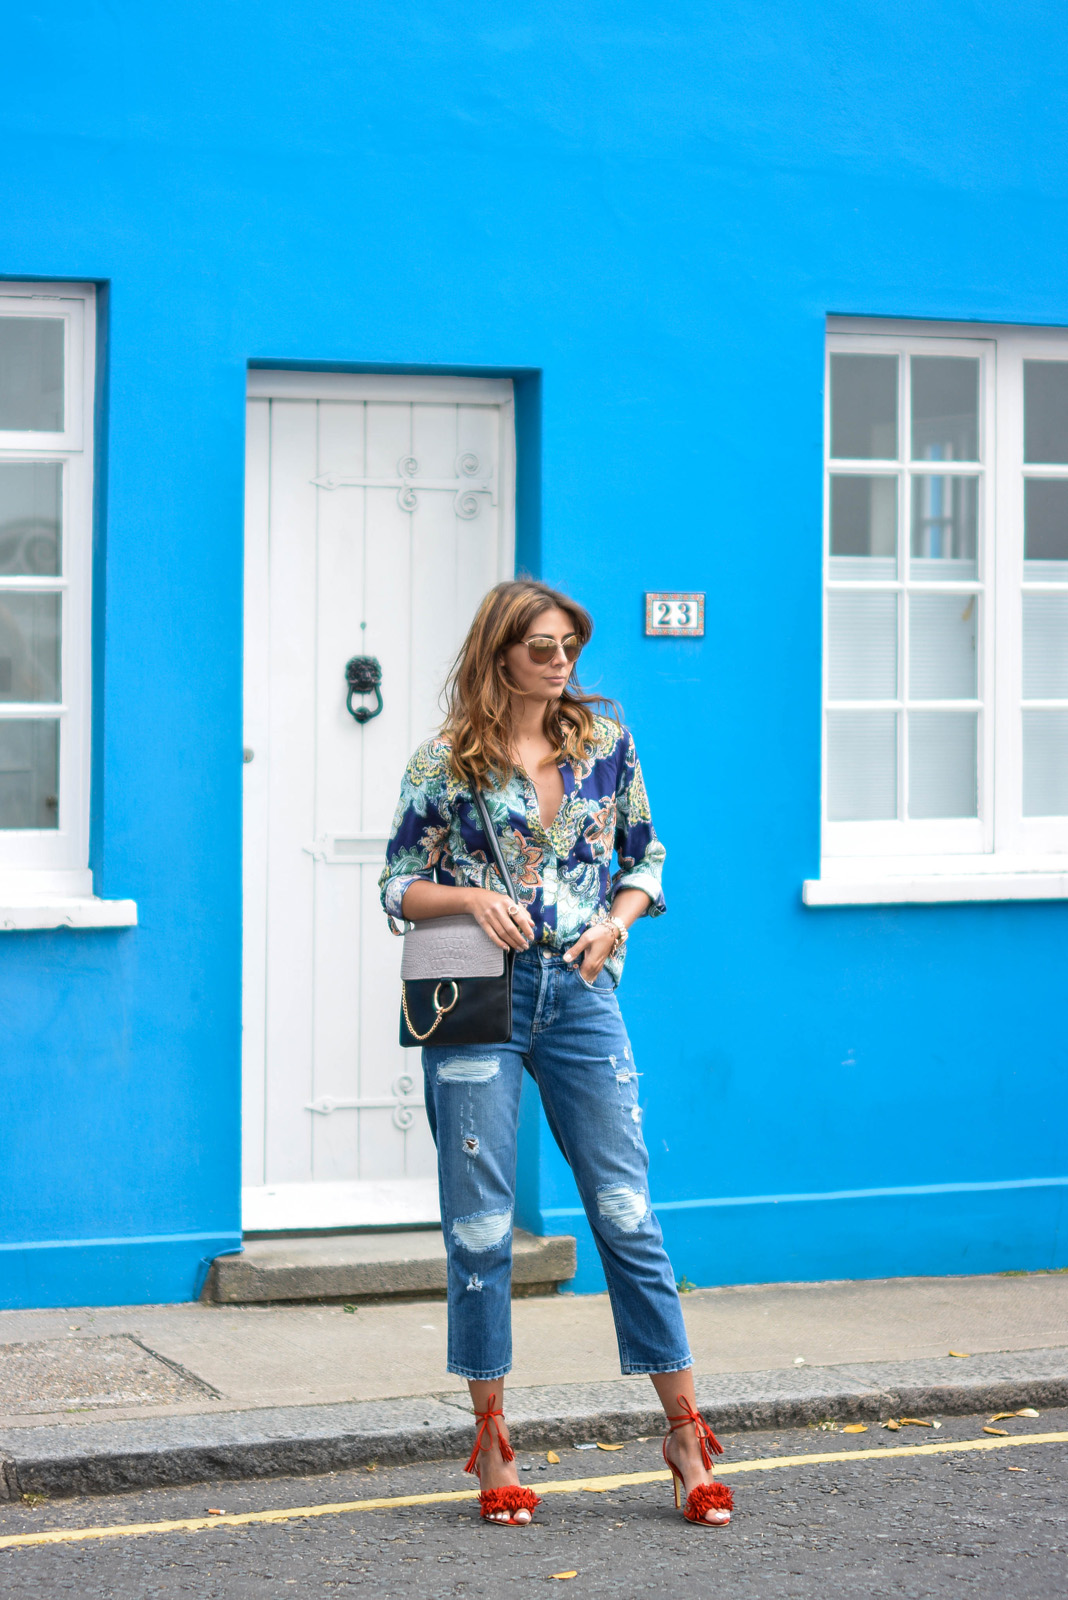 EJSTYLE - Emma Hill Wears Chloe Drew dupe bag, Warehouse navy blue paisley shirt, ASOS boyfriend jeans, River Island sunglasses, Jessica Buurman pom pom, Aquazzura wild thing red suede dupes, street style